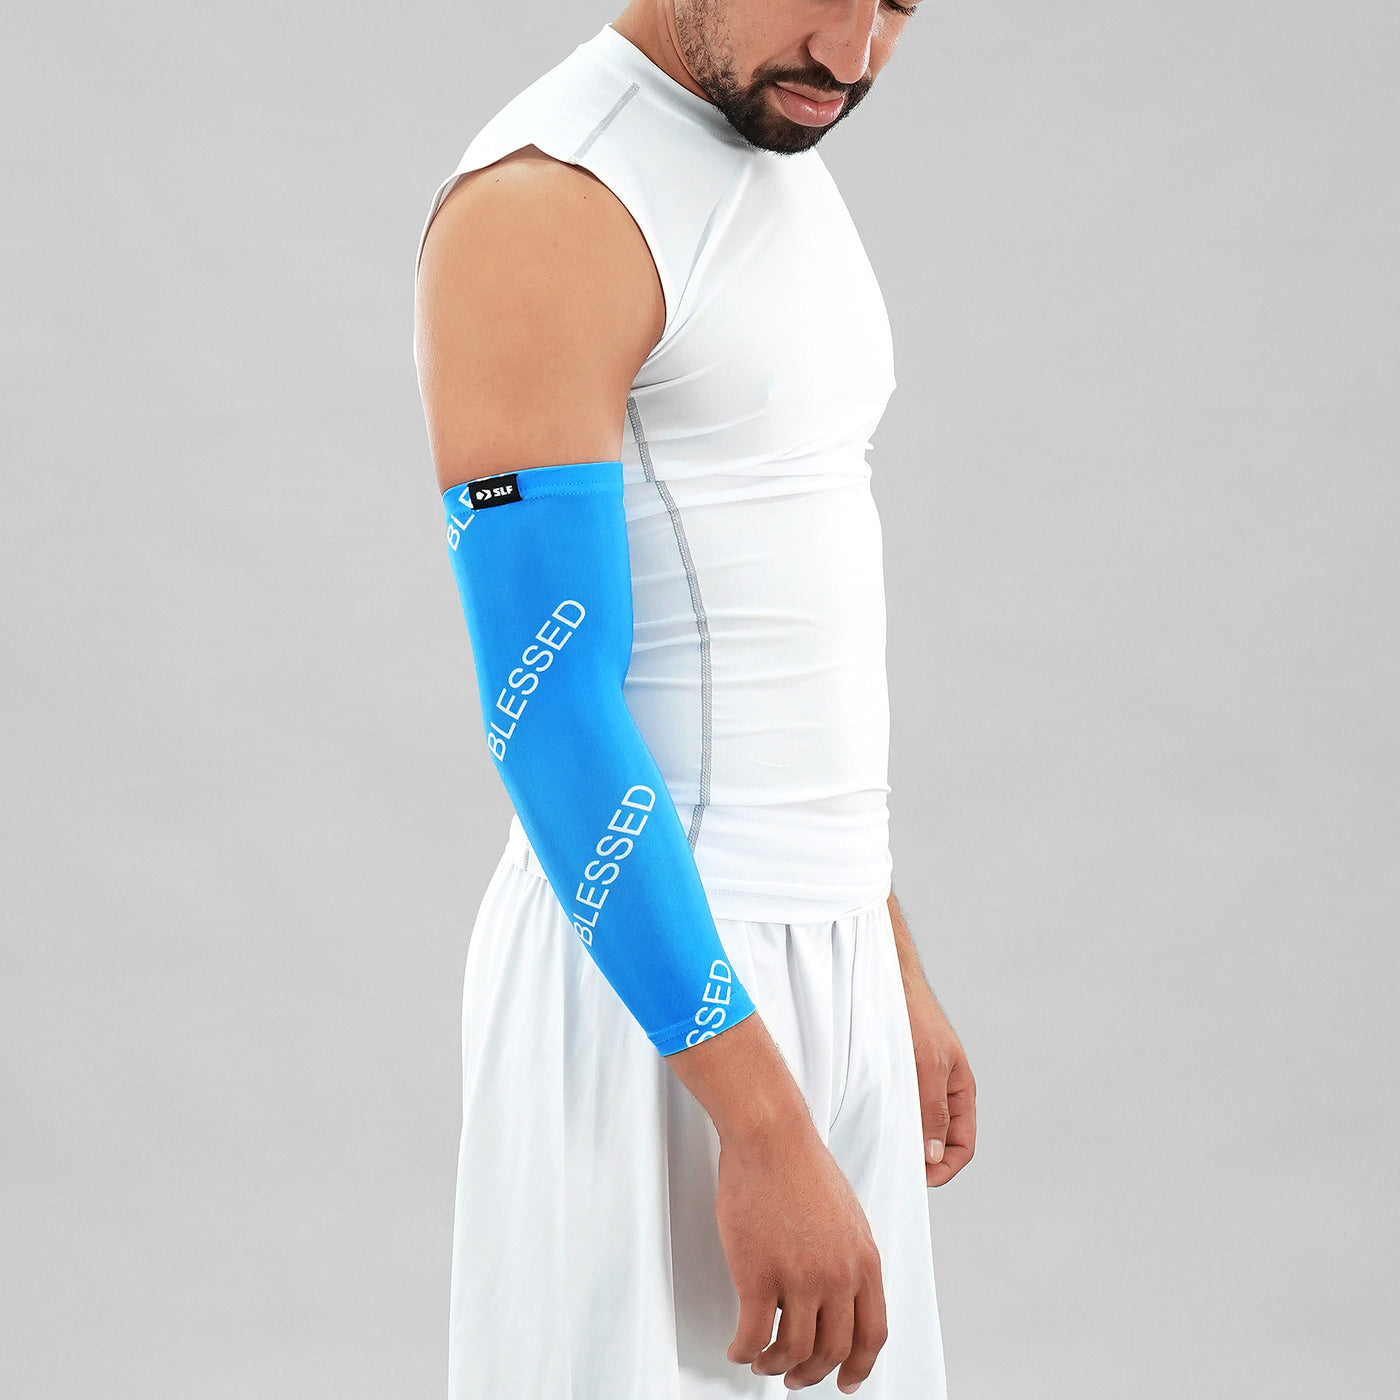 Blessed Pattern Blue 3/4 Arm Sleeve